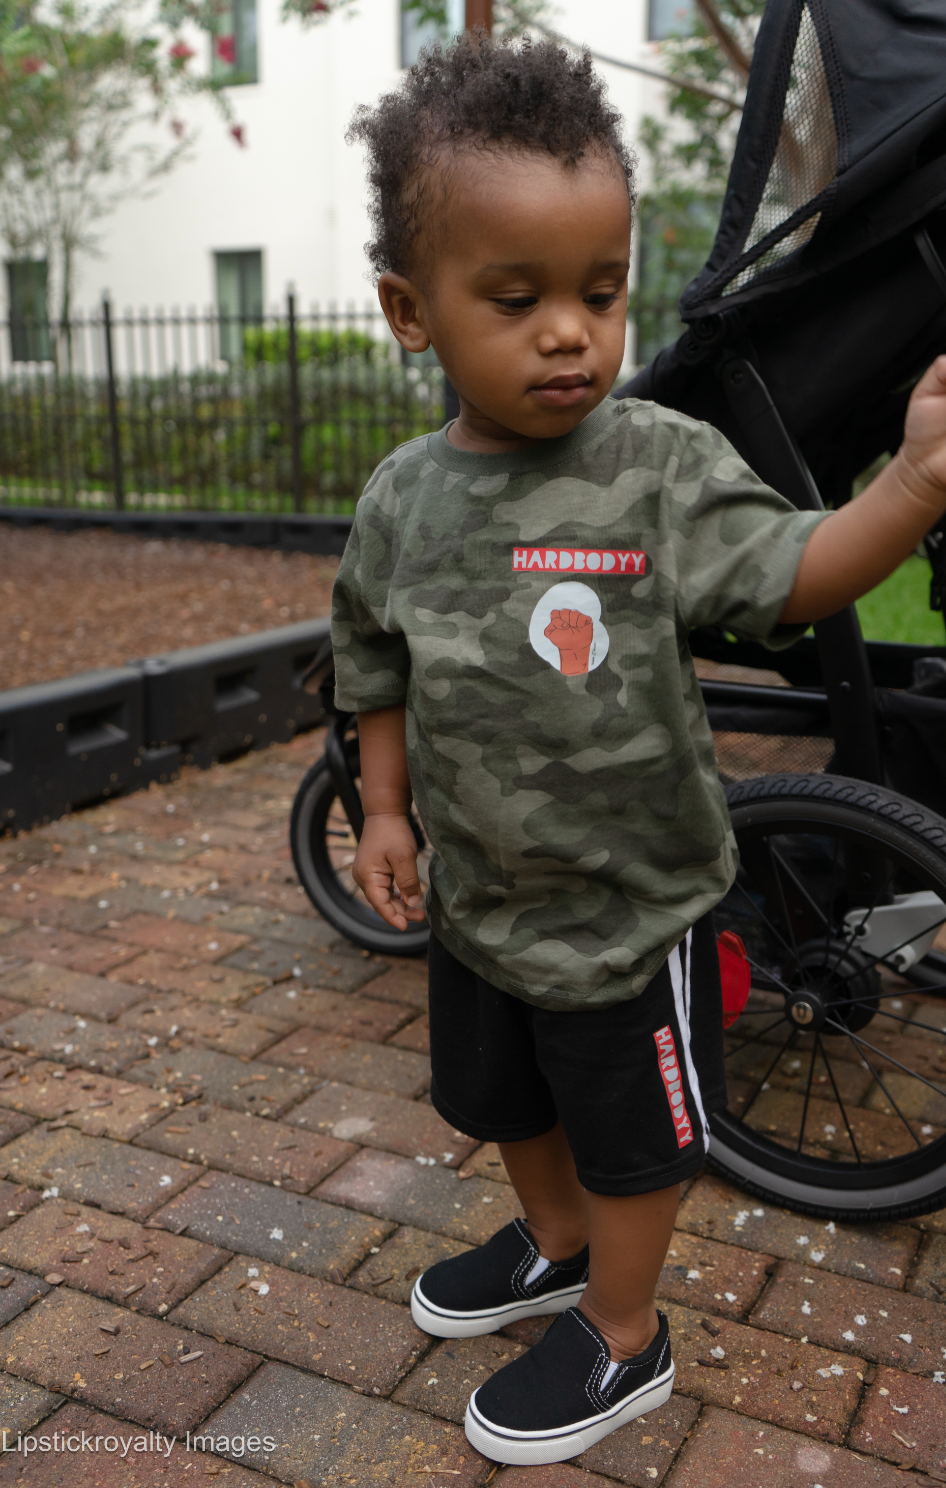 Army fatigue HB Power (Toddler Tee)